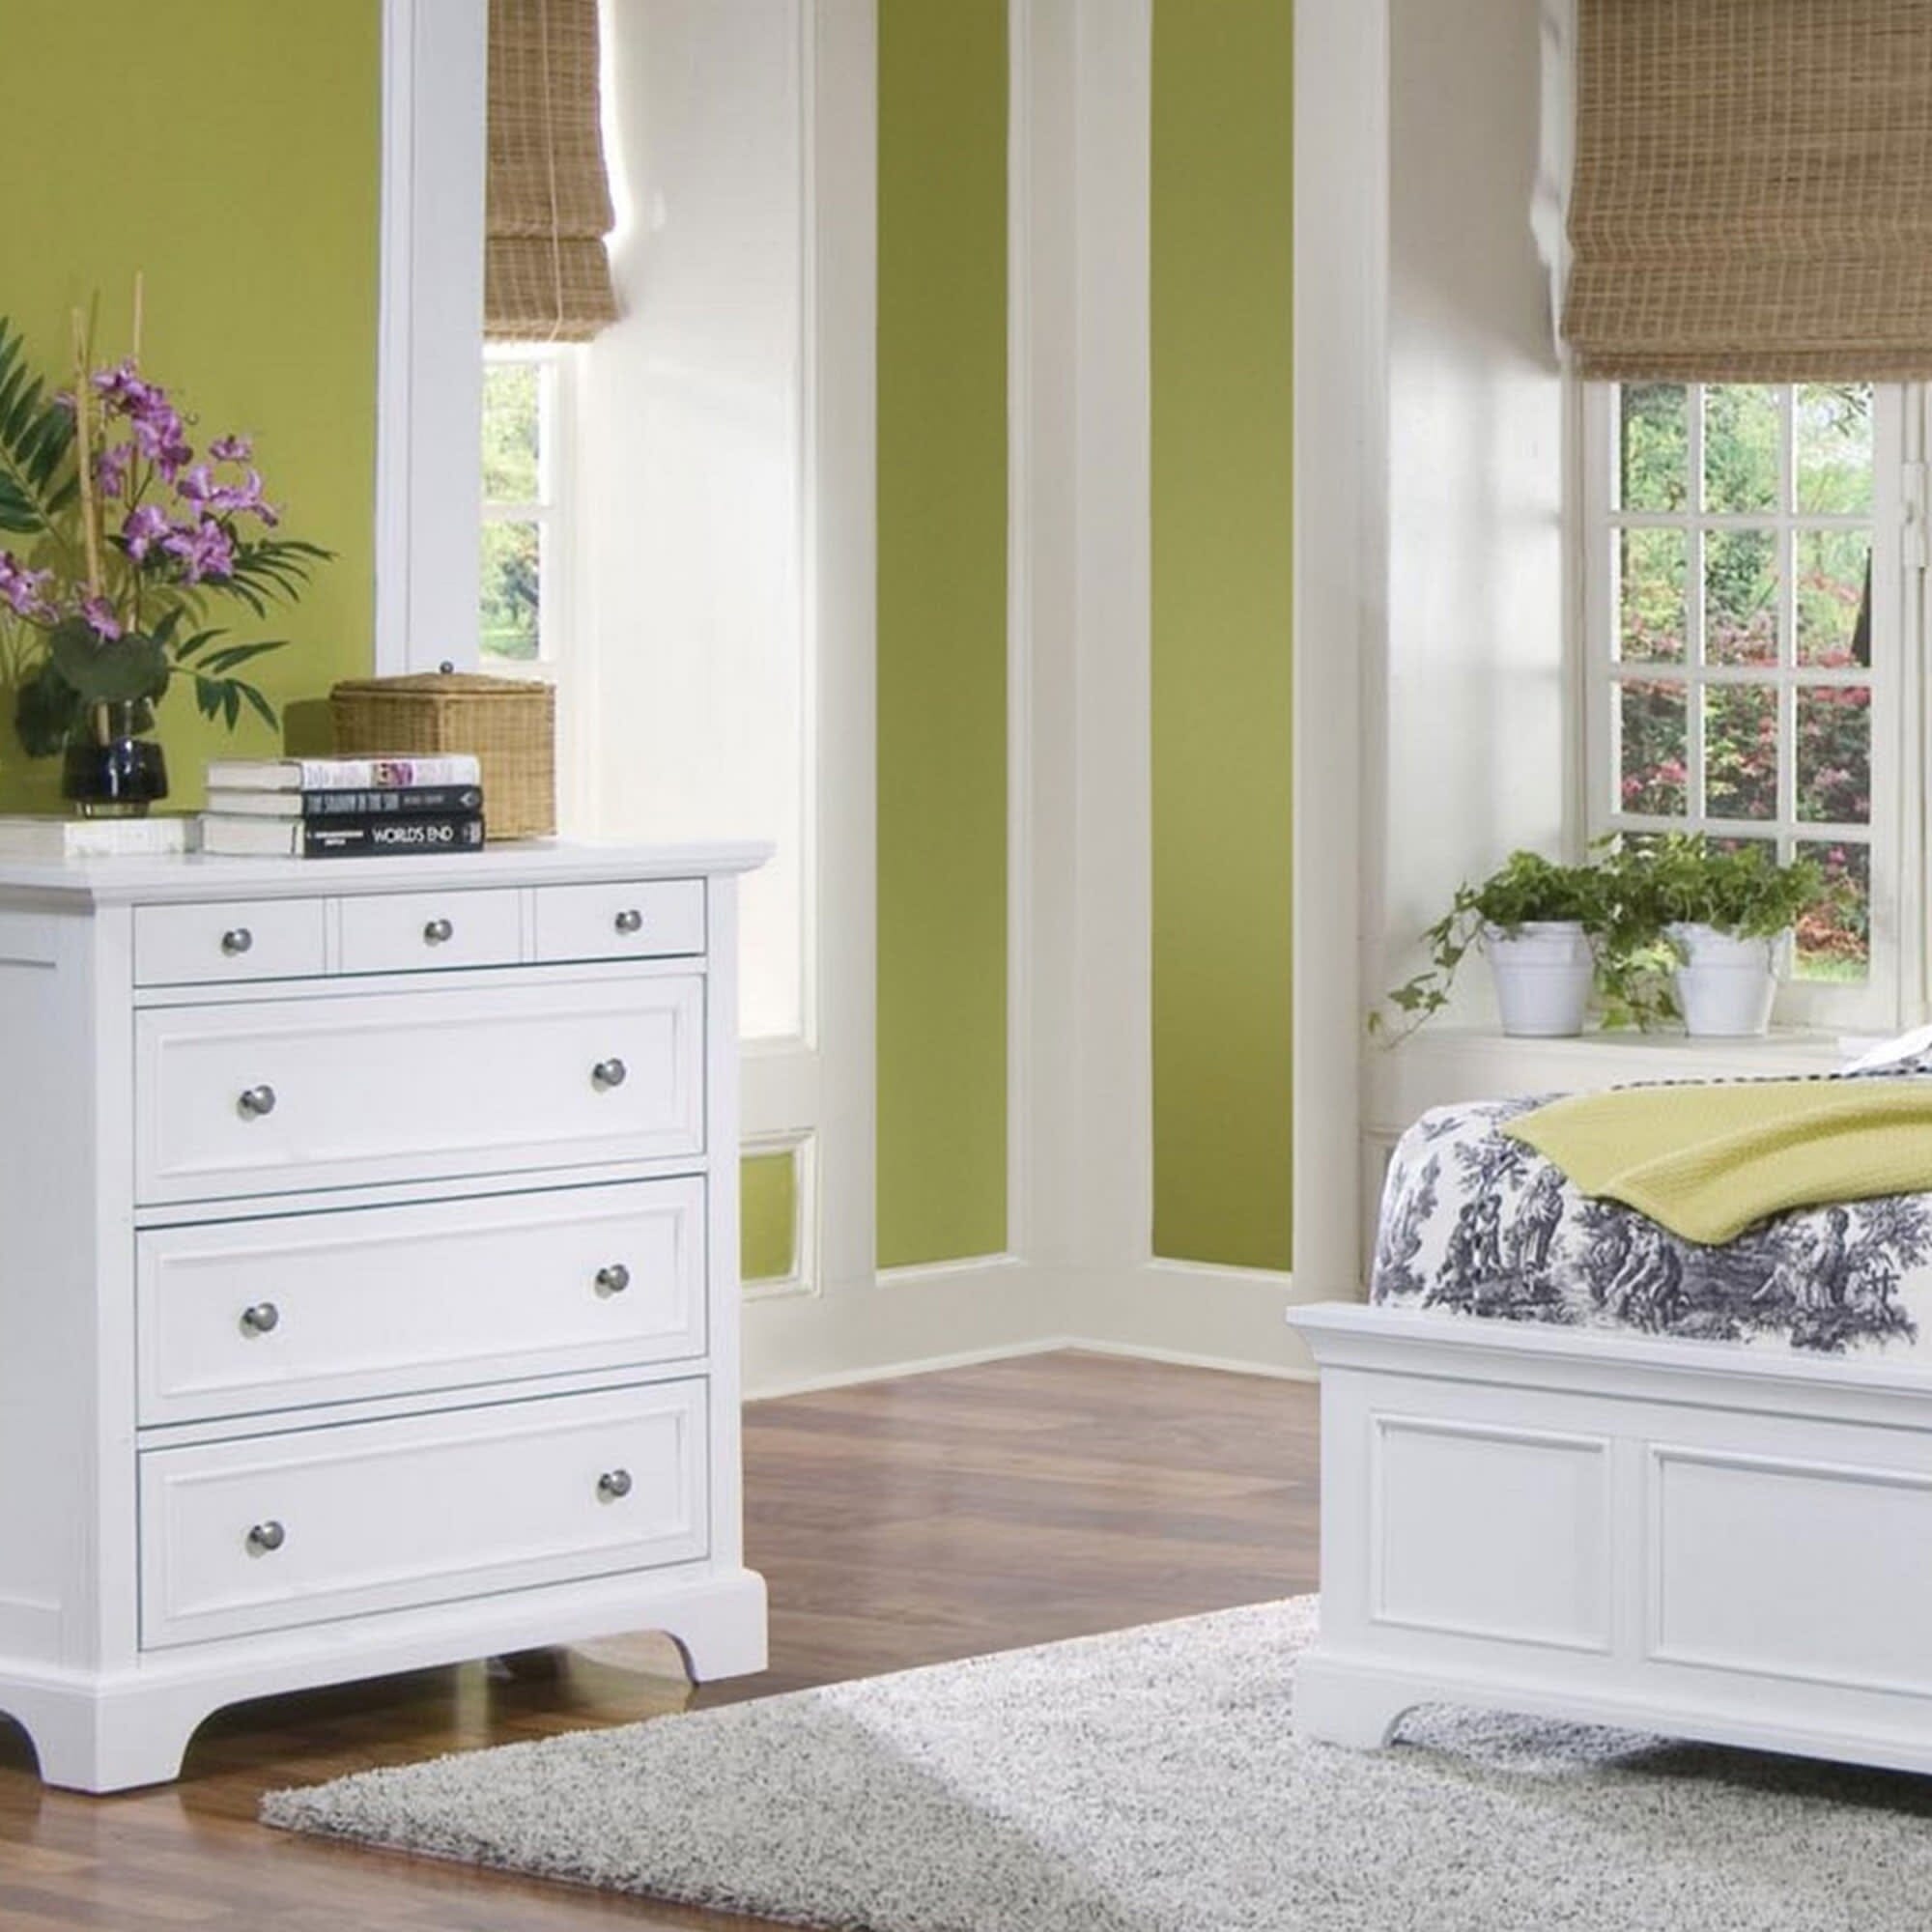 Traditional Queen Bed, Nightstand and Chest By Naples Queen Bed Naples